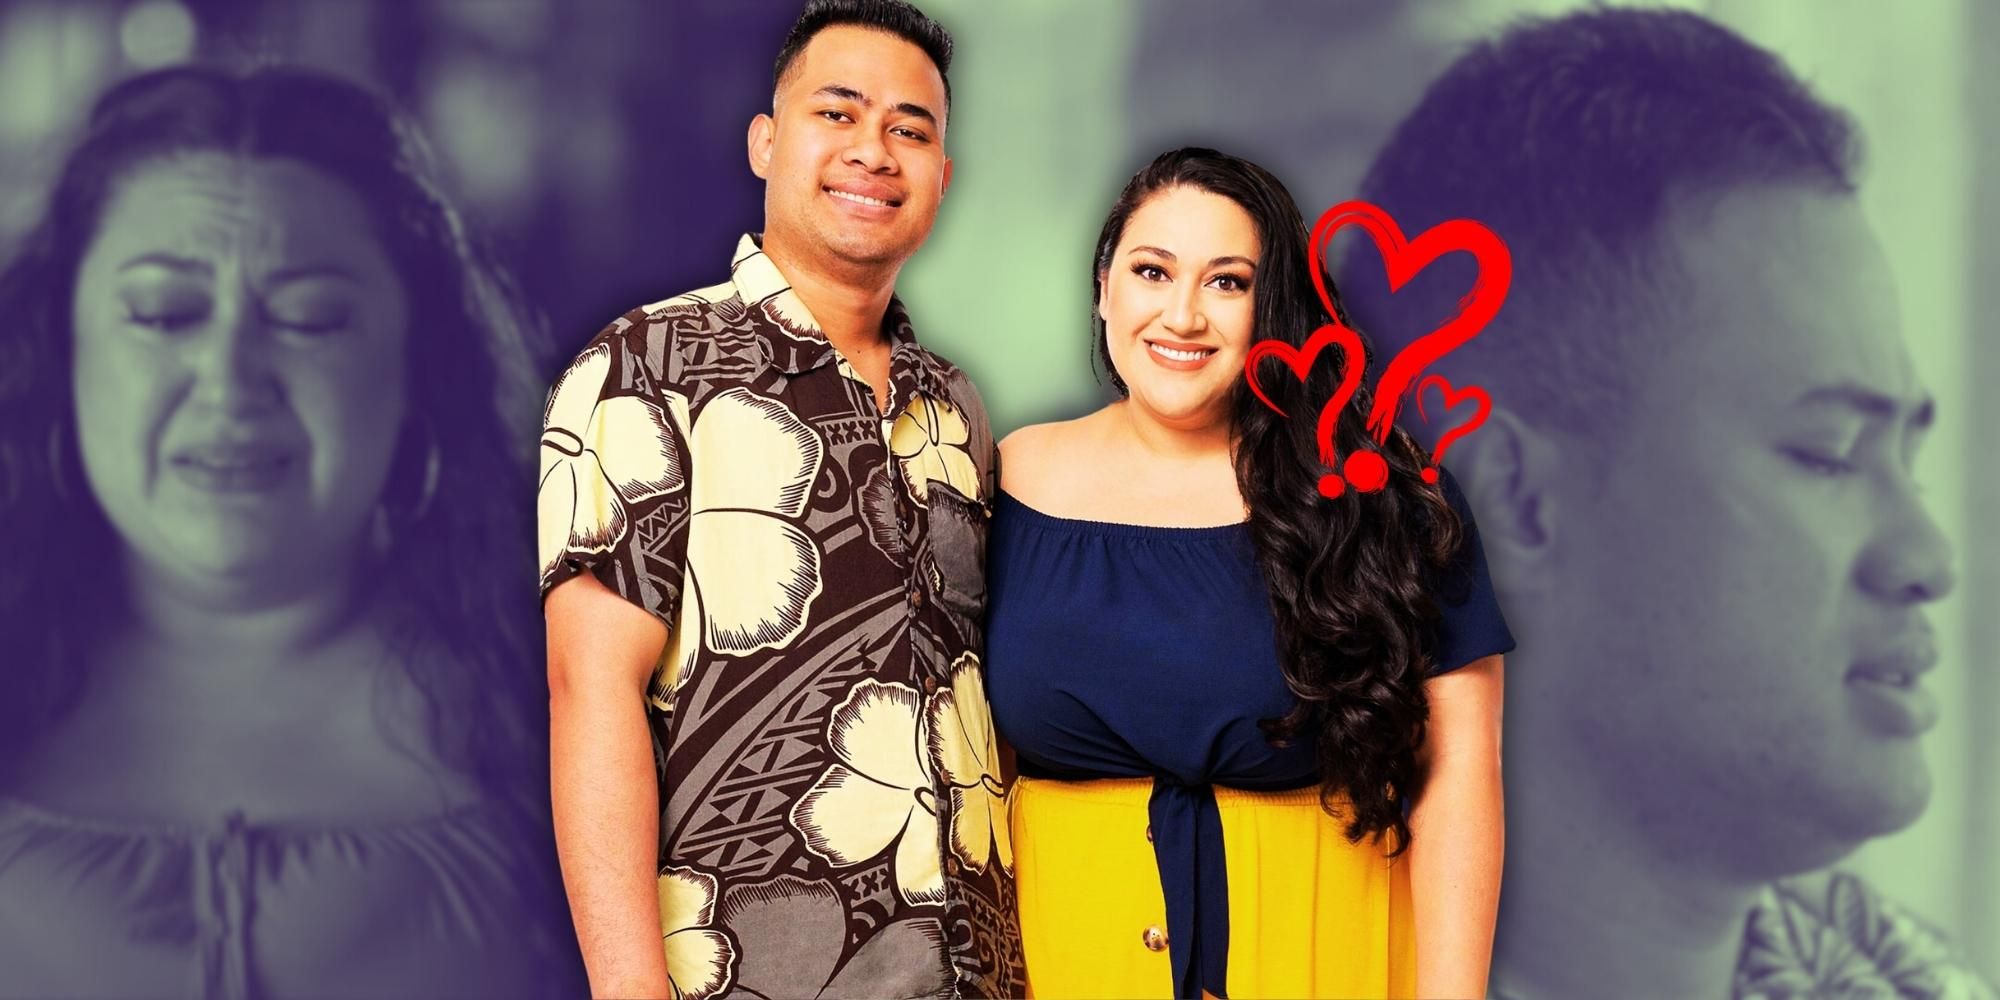 Montage of photos of Kalani and Asuelu from 90 Day Fiance with red question marks